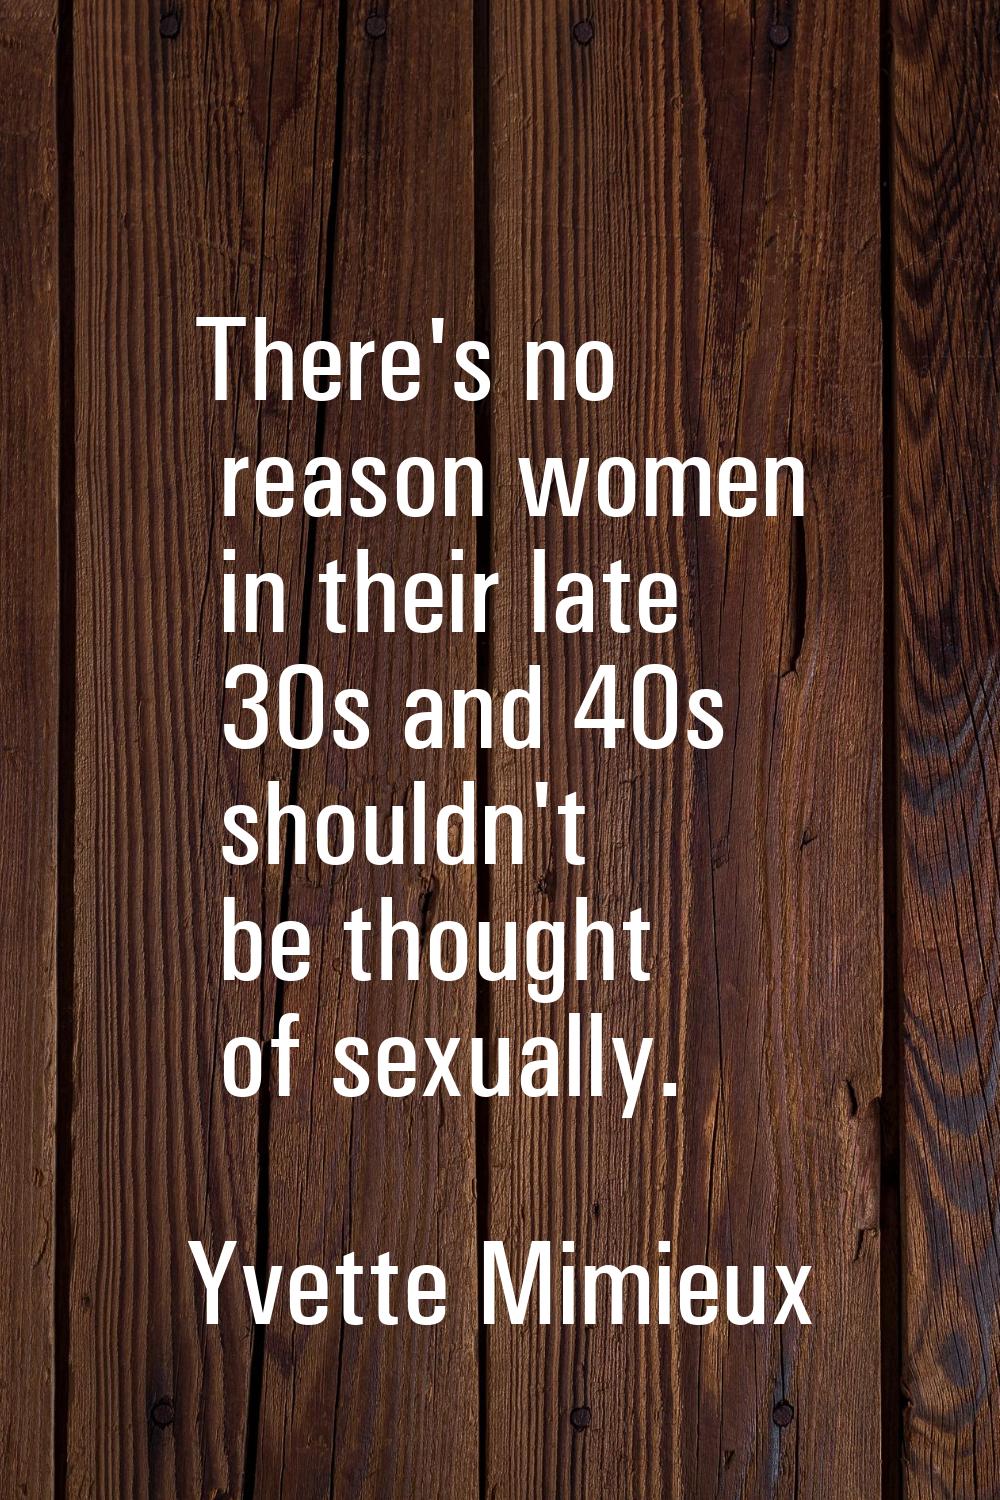 There's no reason women in their late 30s and 40s shouldn't be thought of sexually.